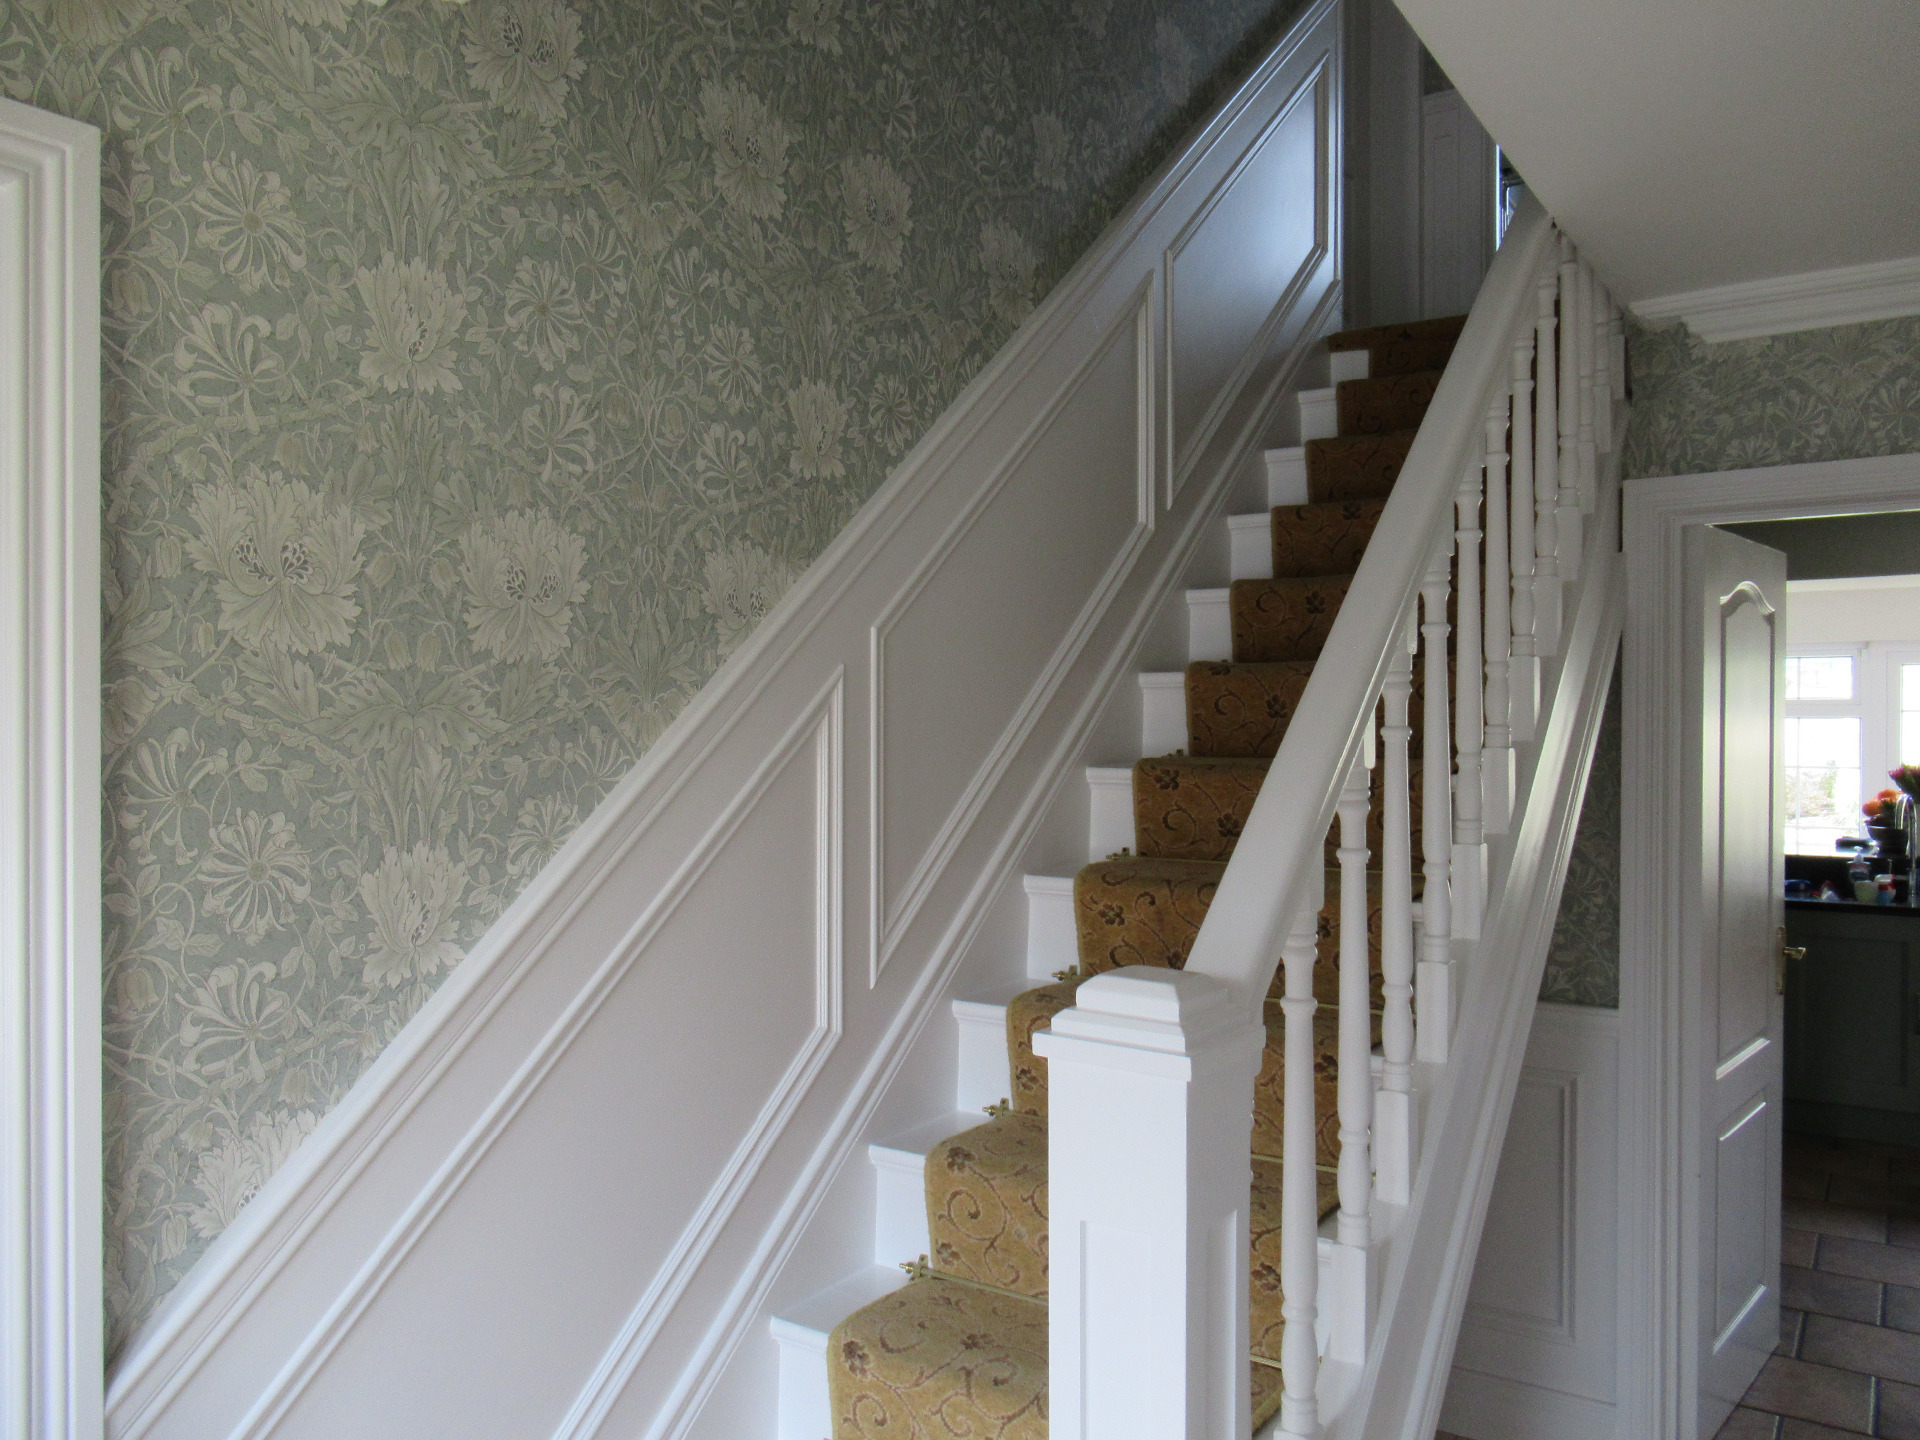 Stair wall panelling installed by Elite Building Services Swords